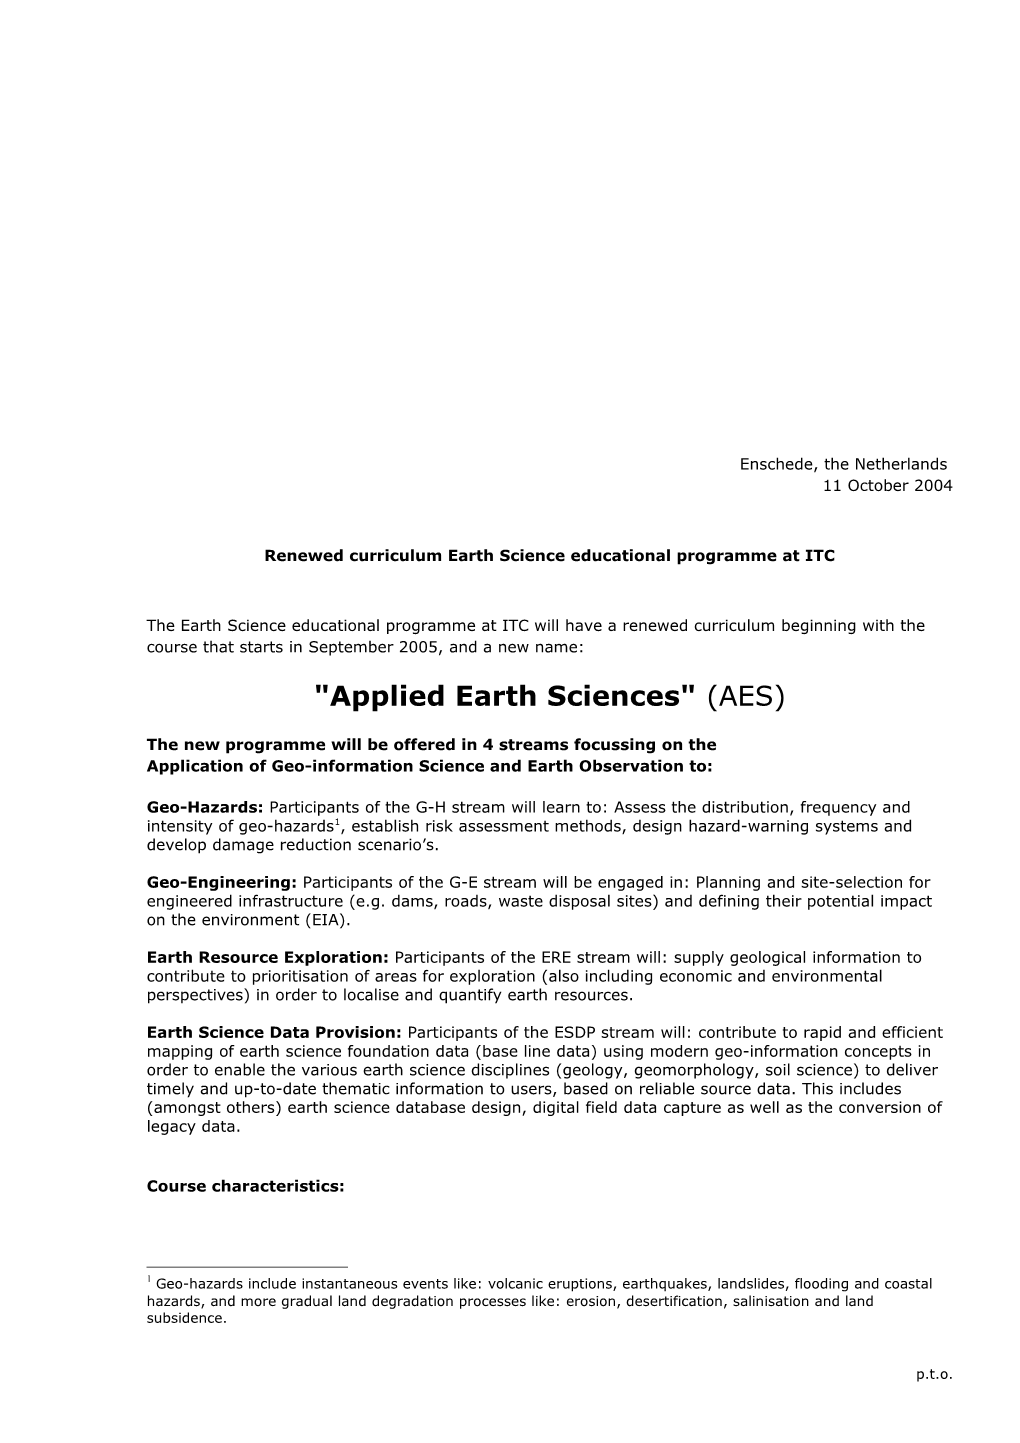 Renewed Curriculum Earth Science Educational Programme at ITC